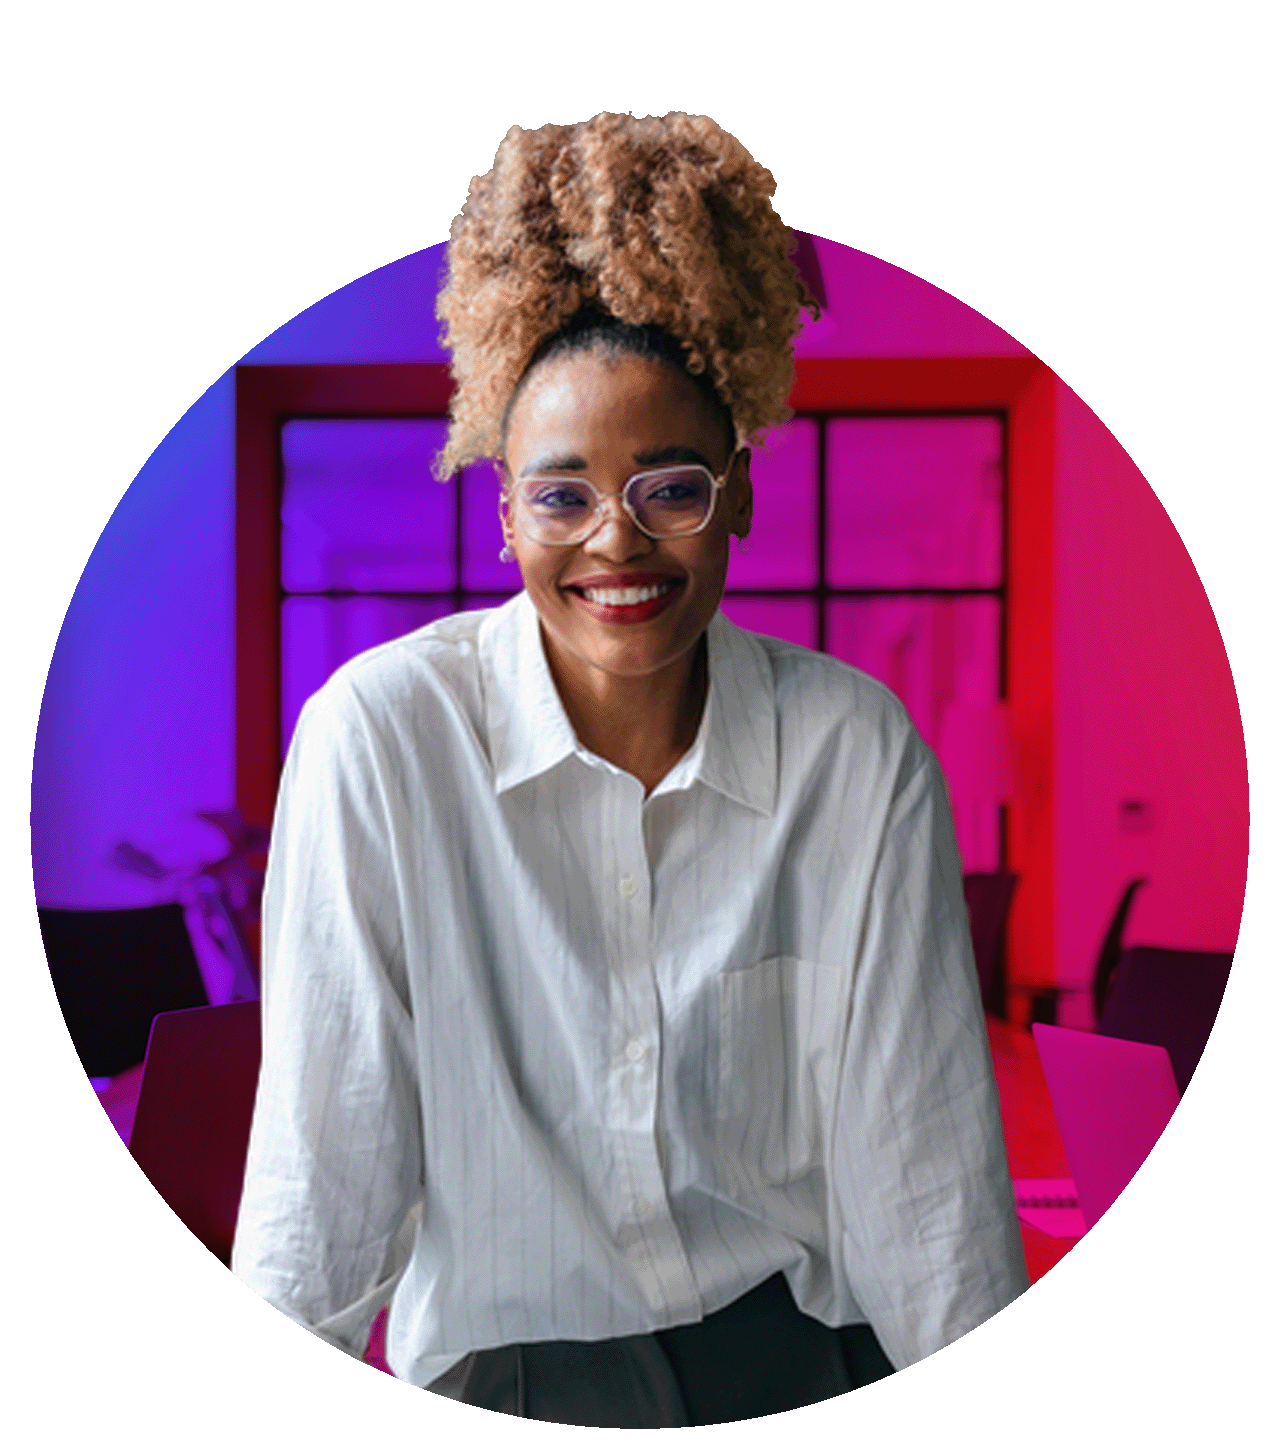 Onward Search hire marketing experts hero image; African American marketing professional smiling with purple/red gradient background